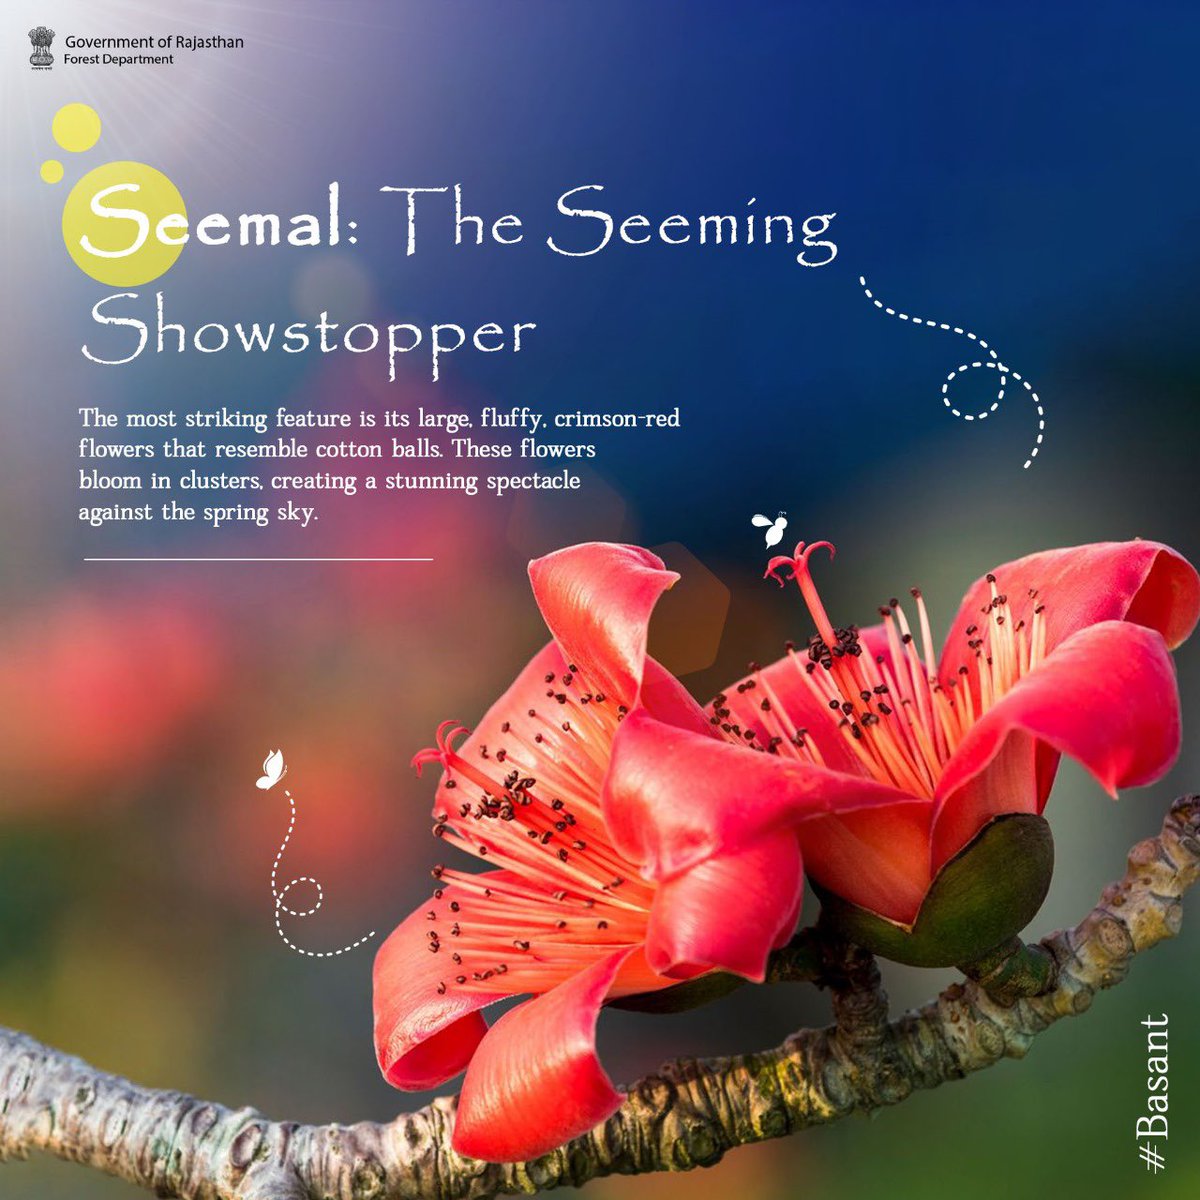 The blooming of the Semal tree holds cultural significance in Rajasthan, marking the arrival of spring, a season associated with renewal and celebration. 🌸